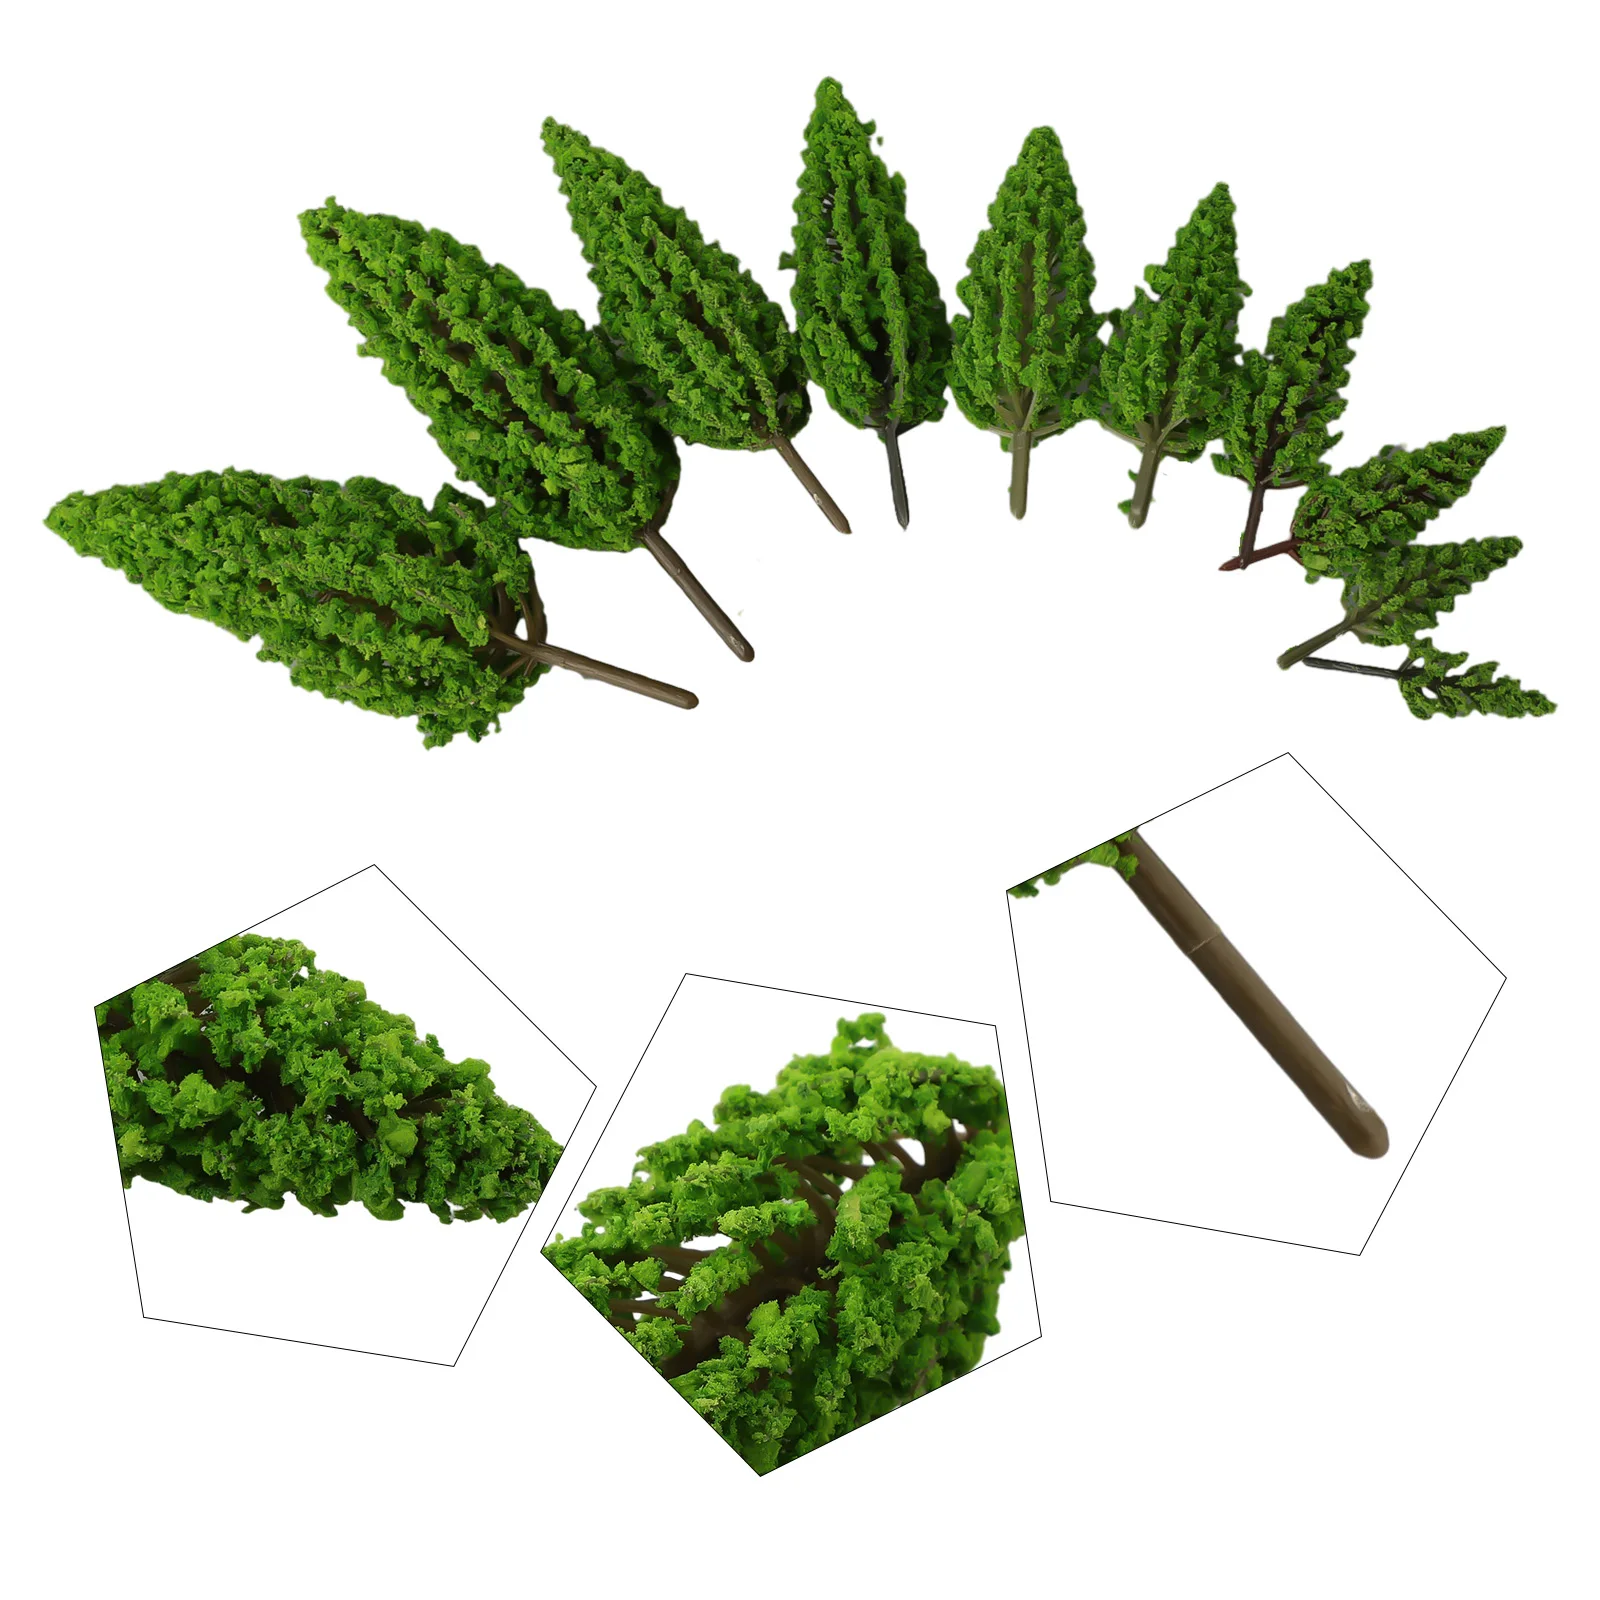 Enhance Your Miniature World with Green Pine Model Trees, Suitable for Train Railroad Models, Wargaming, and Bonsai Decoration